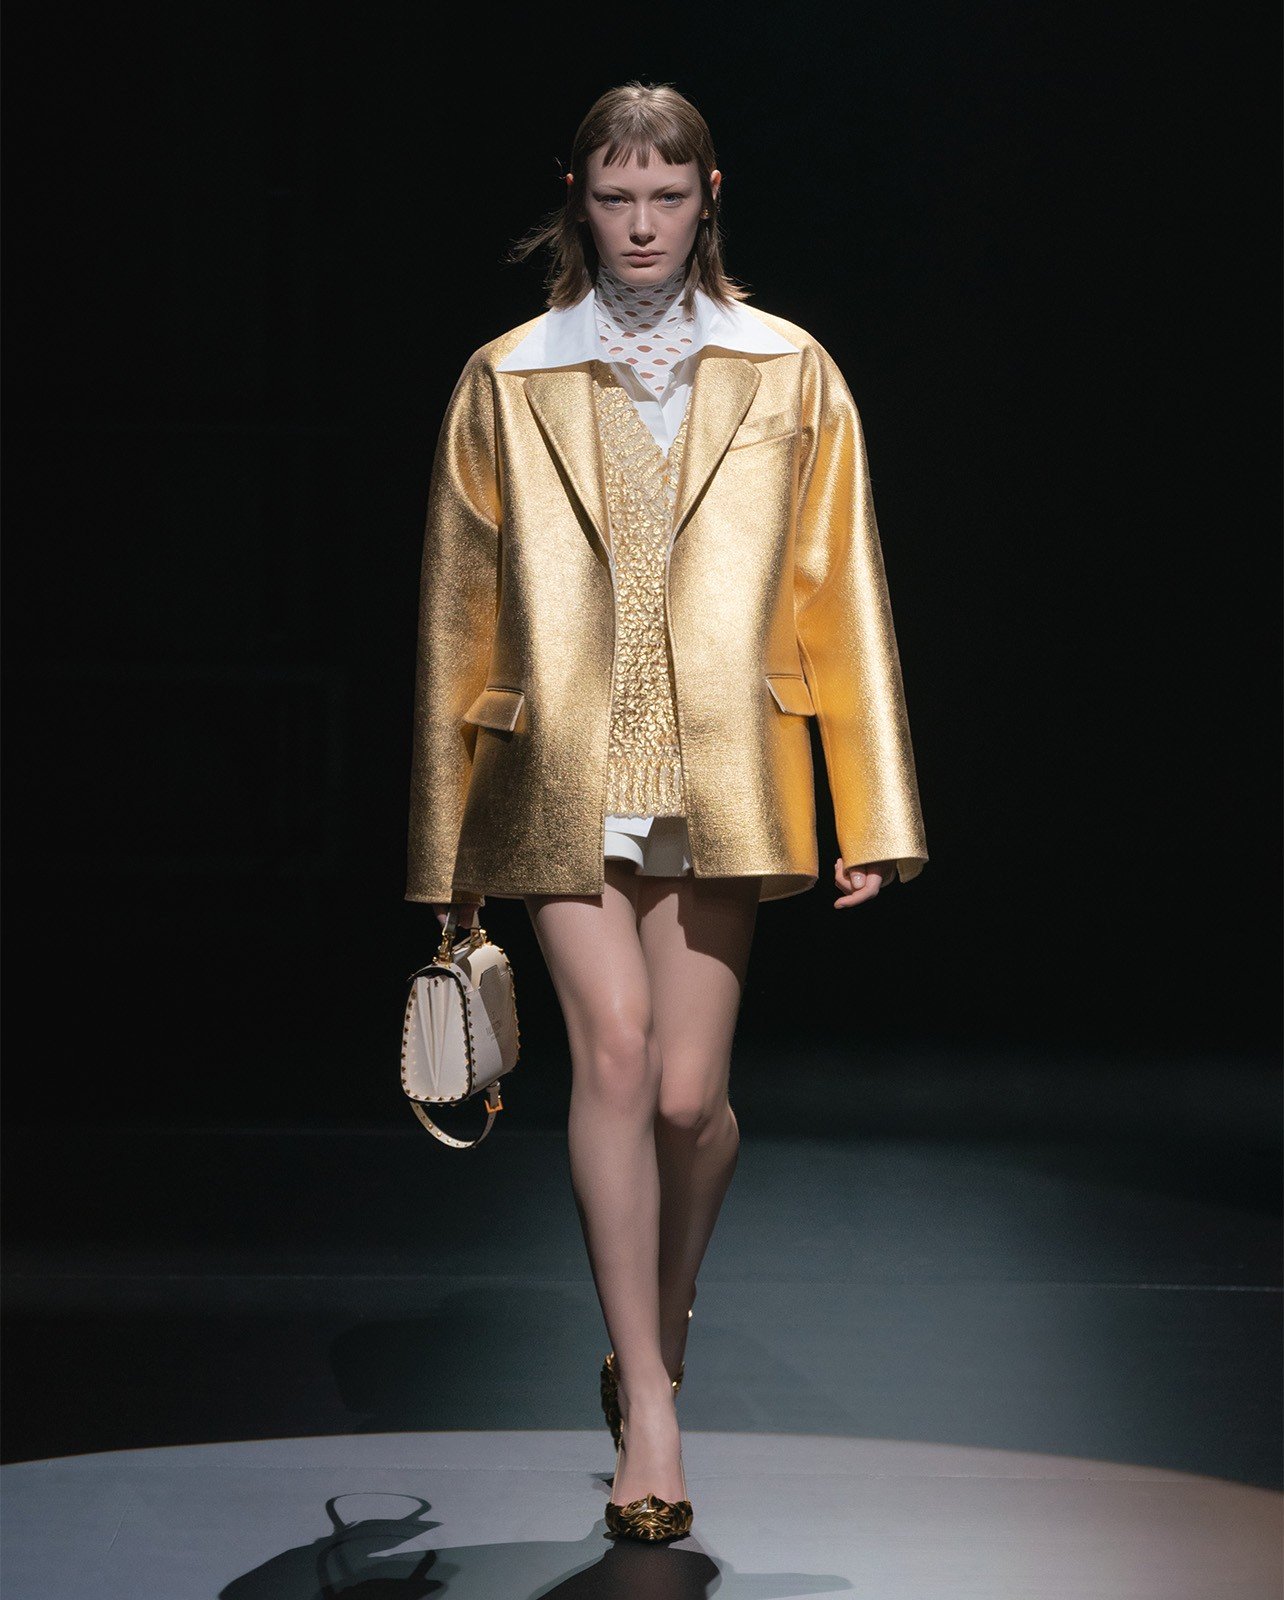 Woman walking on a runway wearing a gold jacket over a gold sweater and white undergarments